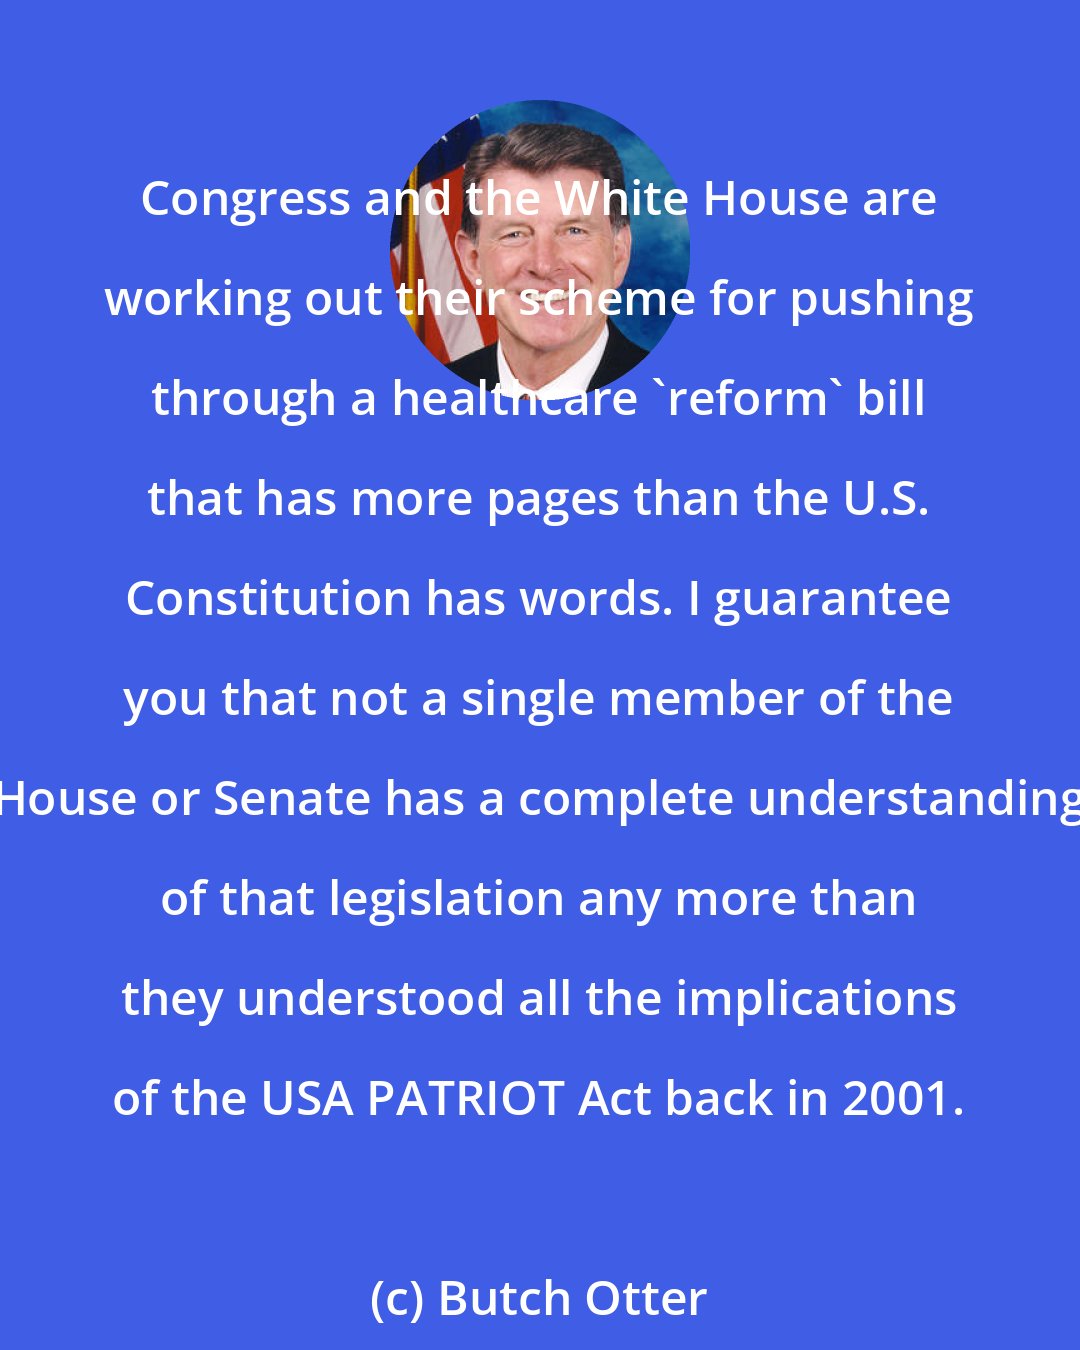 Butch Otter: Congress and the White House are working out their scheme for pushing through a healthcare 'reform' bill that has more pages than the U.S. Constitution has words. I guarantee you that not a single member of the House or Senate has a complete understanding of that legislation any more than they understood all the implications of the USA PATRIOT Act back in 2001.